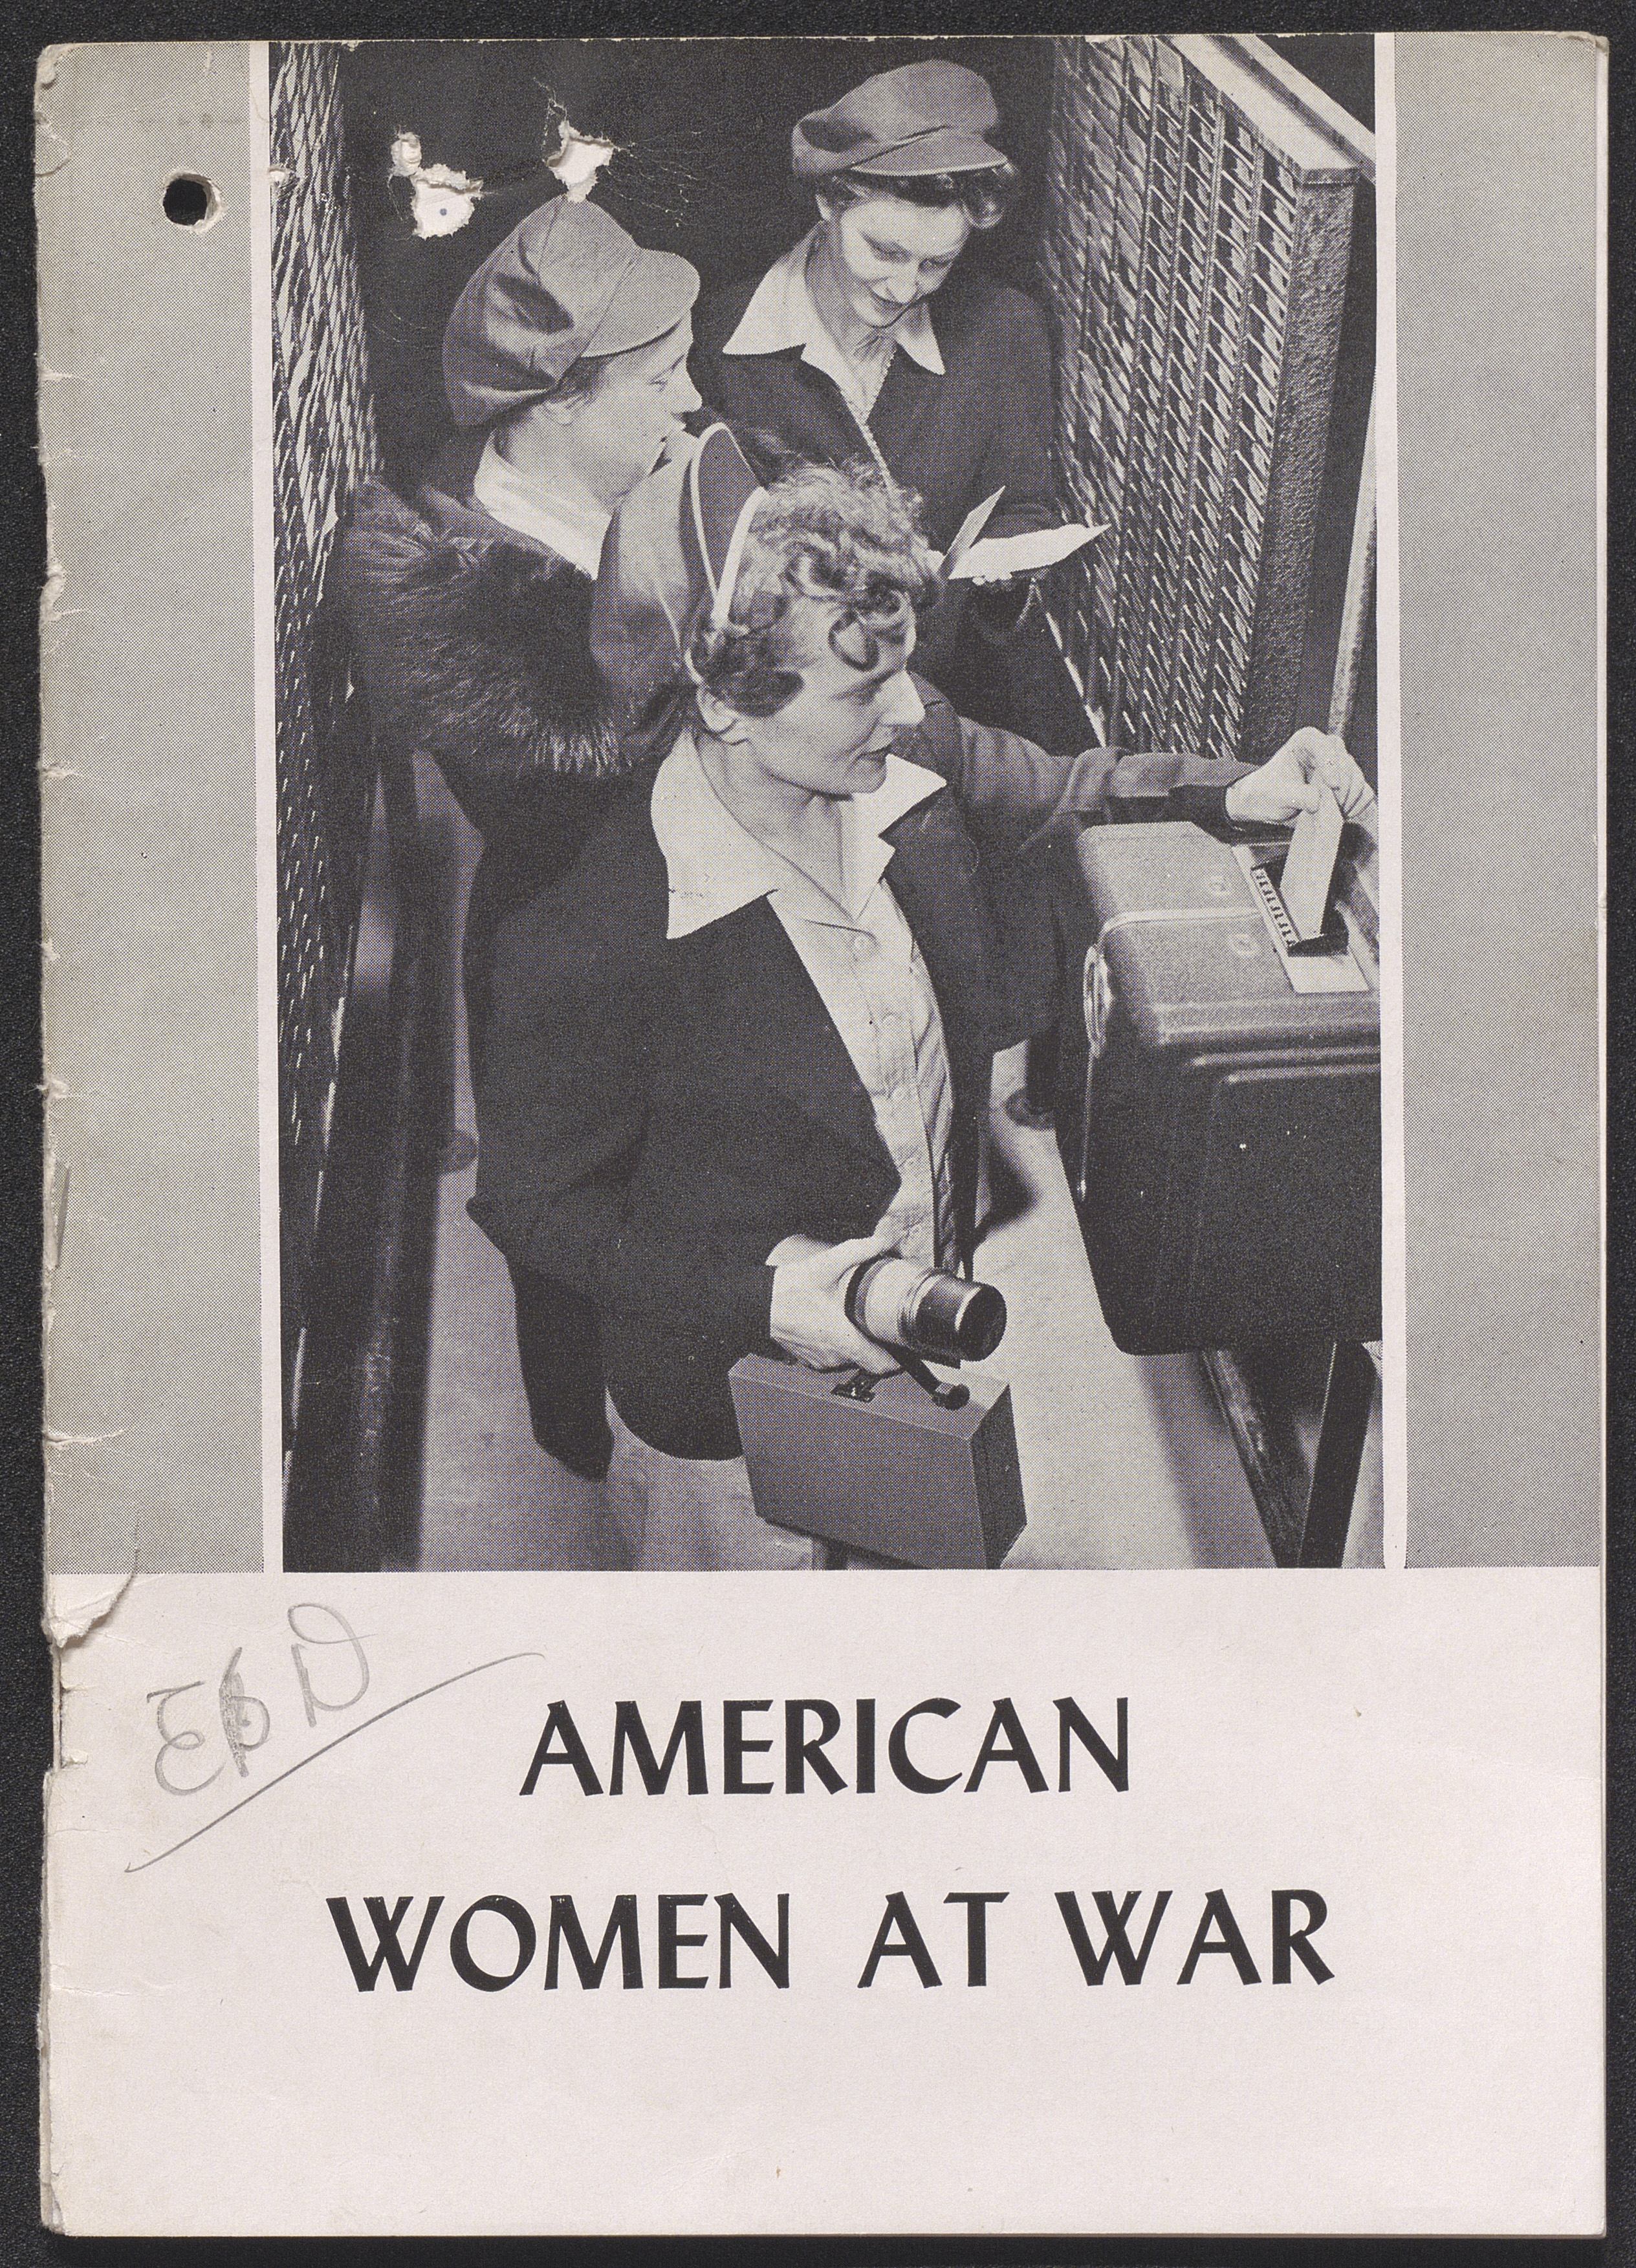 Cover of a pamphlet; photograph of women using a timeclock, title "American Women at War"